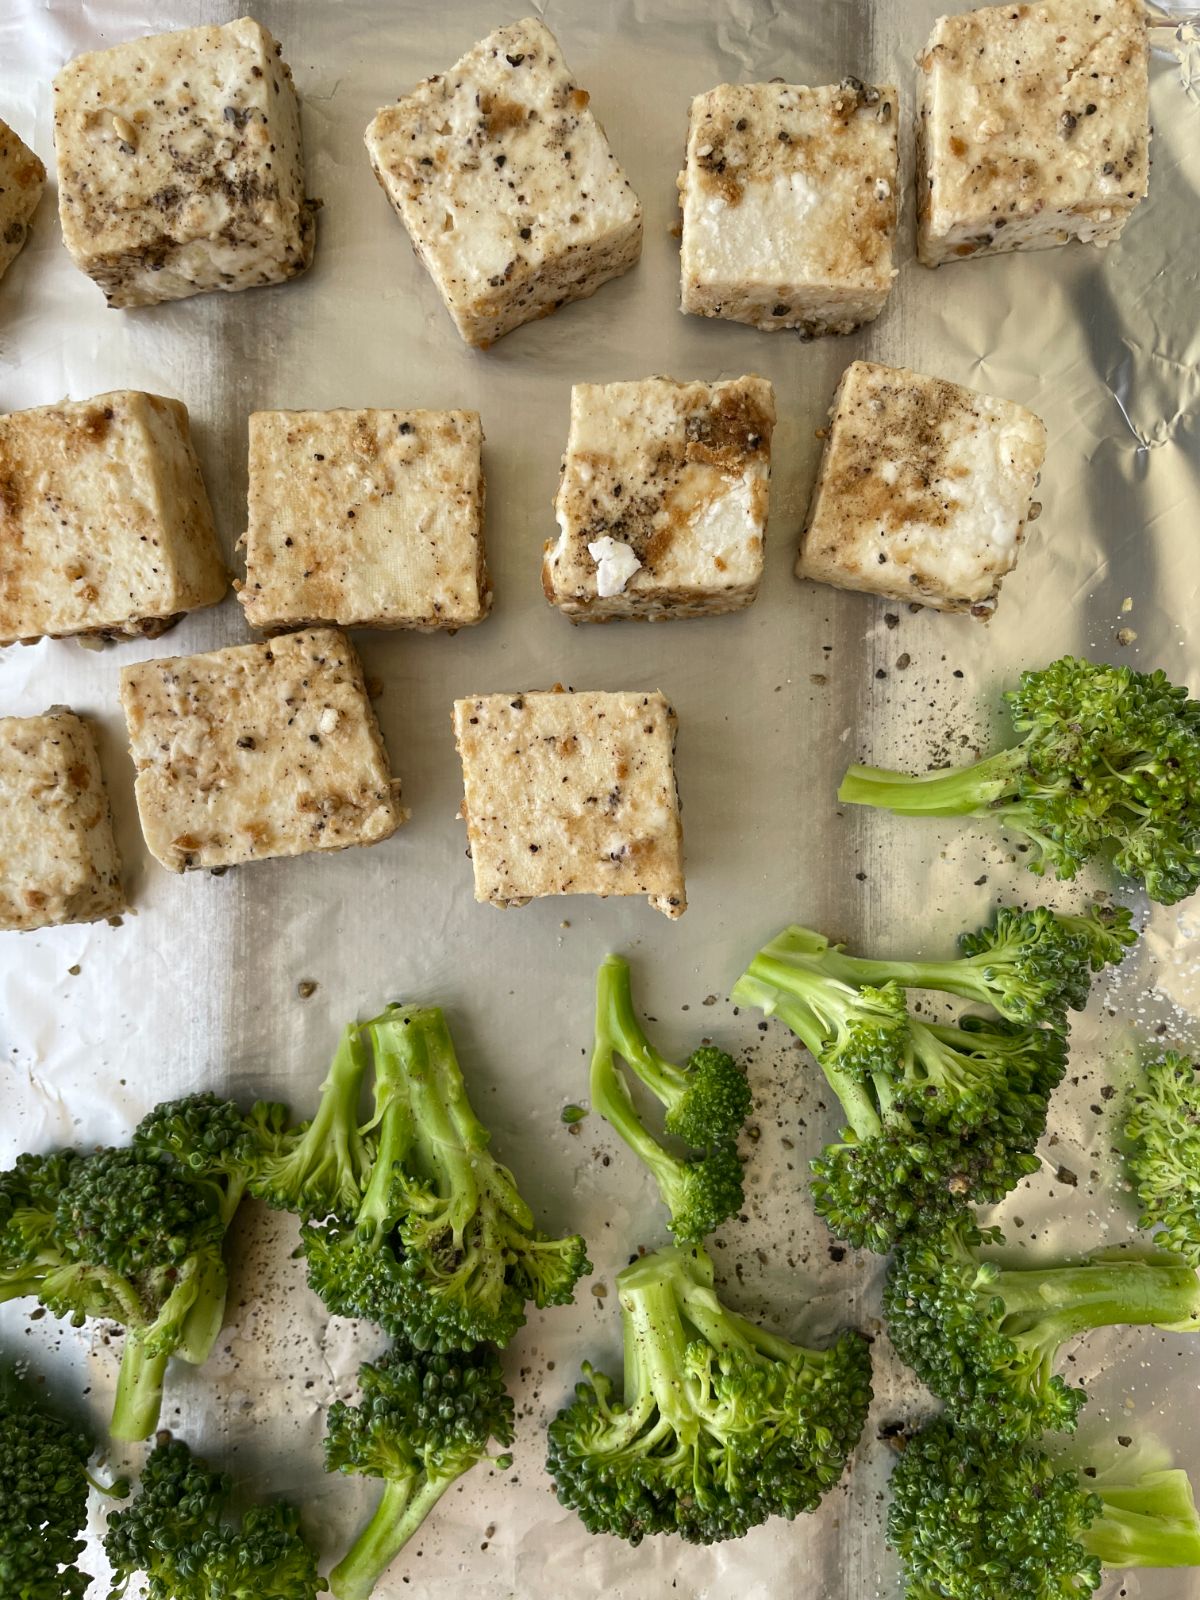 bake coated tofu pieces and broccoli florets in an aluminum foil